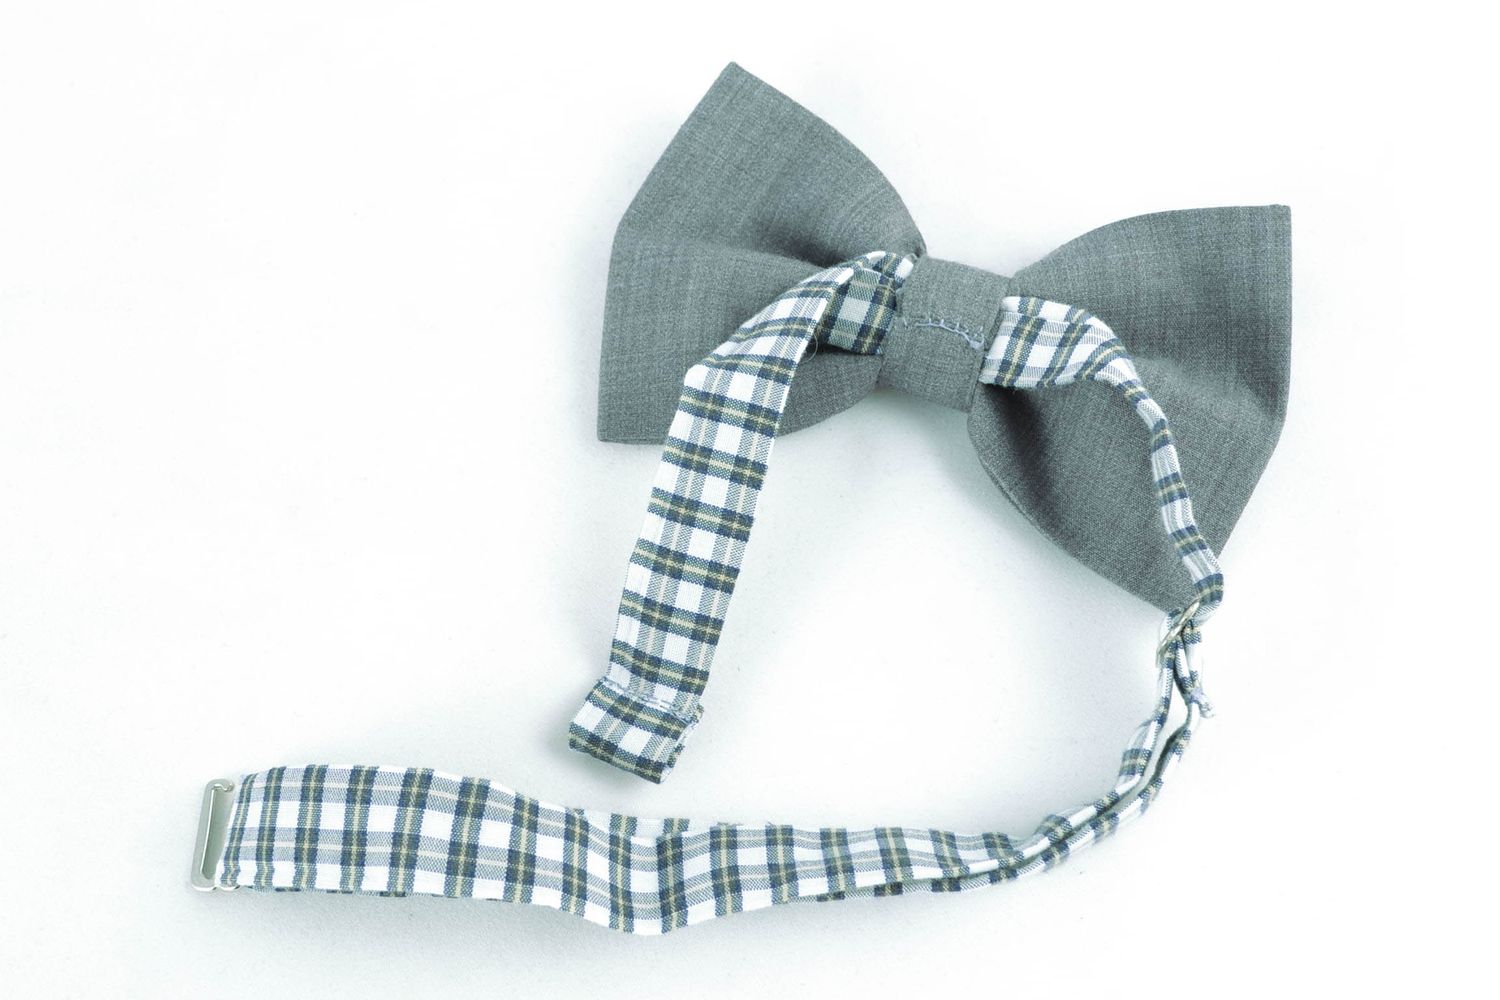 Fabric bow tie for tweed jacket photo 4